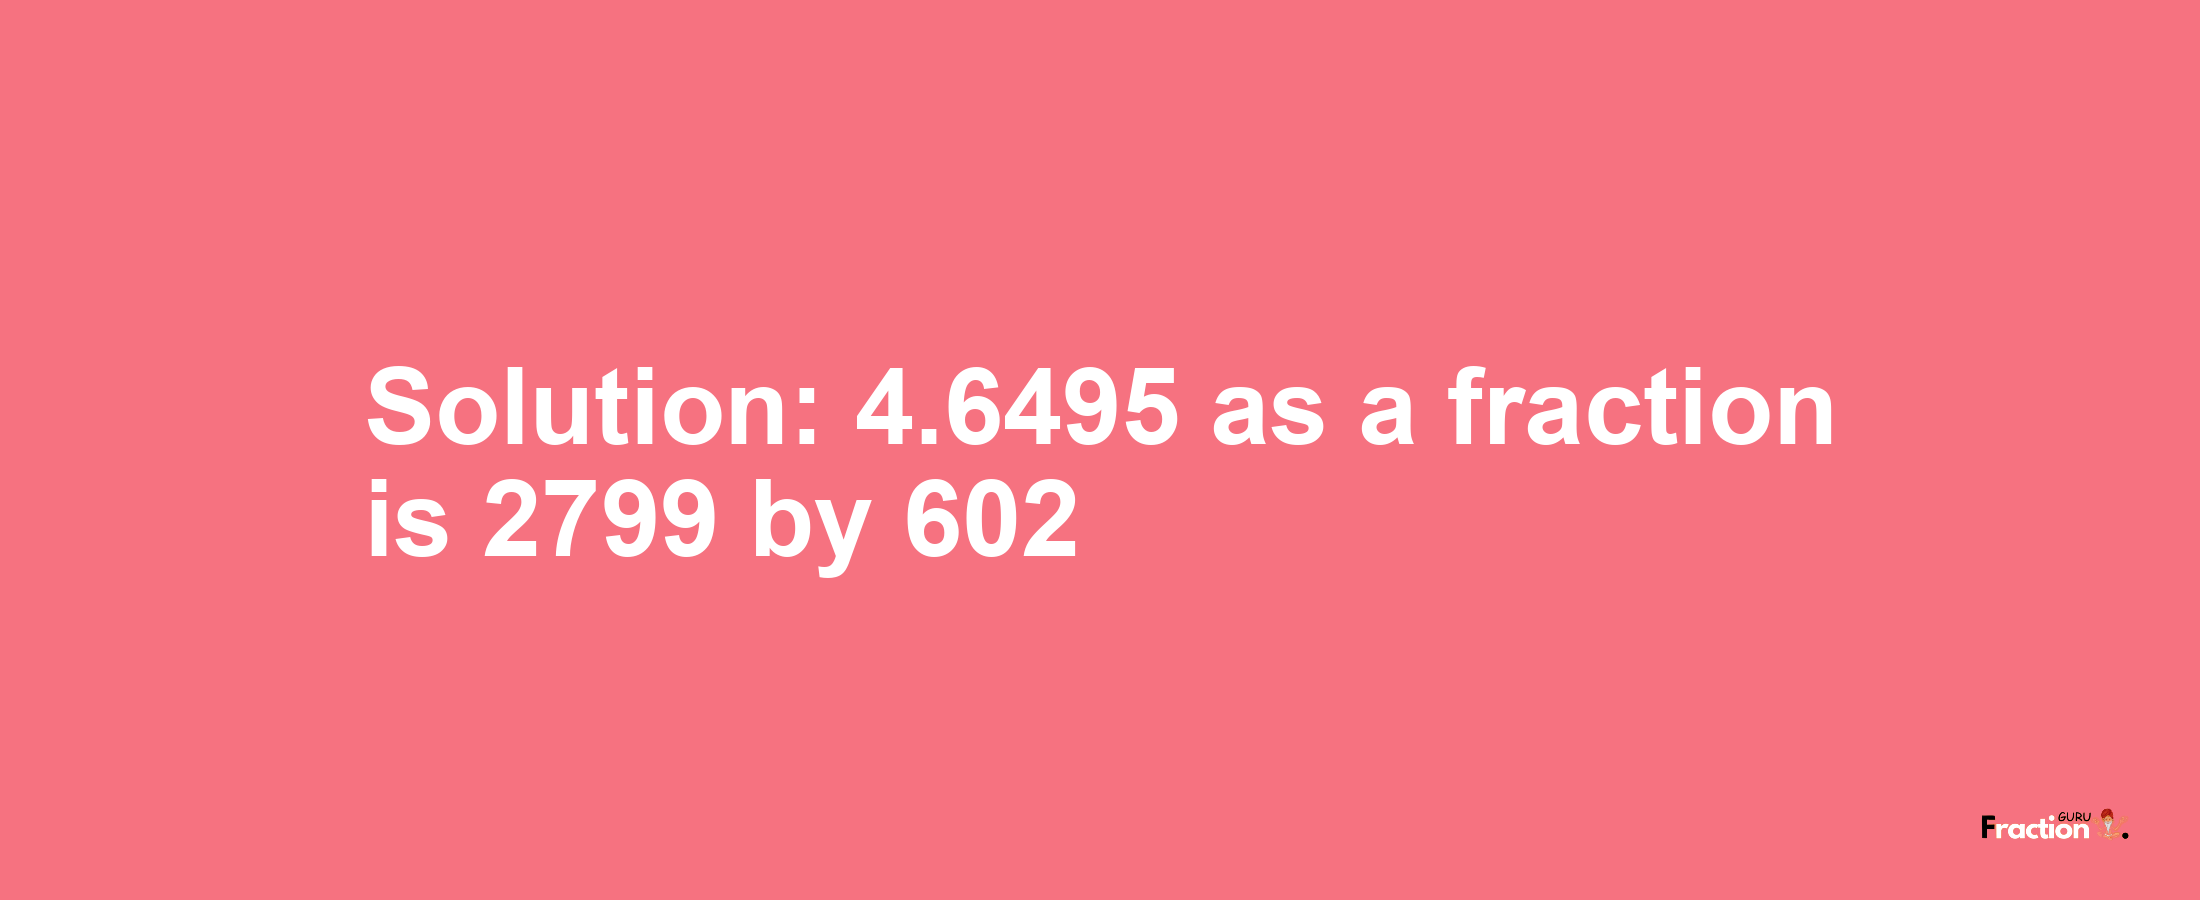 Solution:4.6495 as a fraction is 2799/602